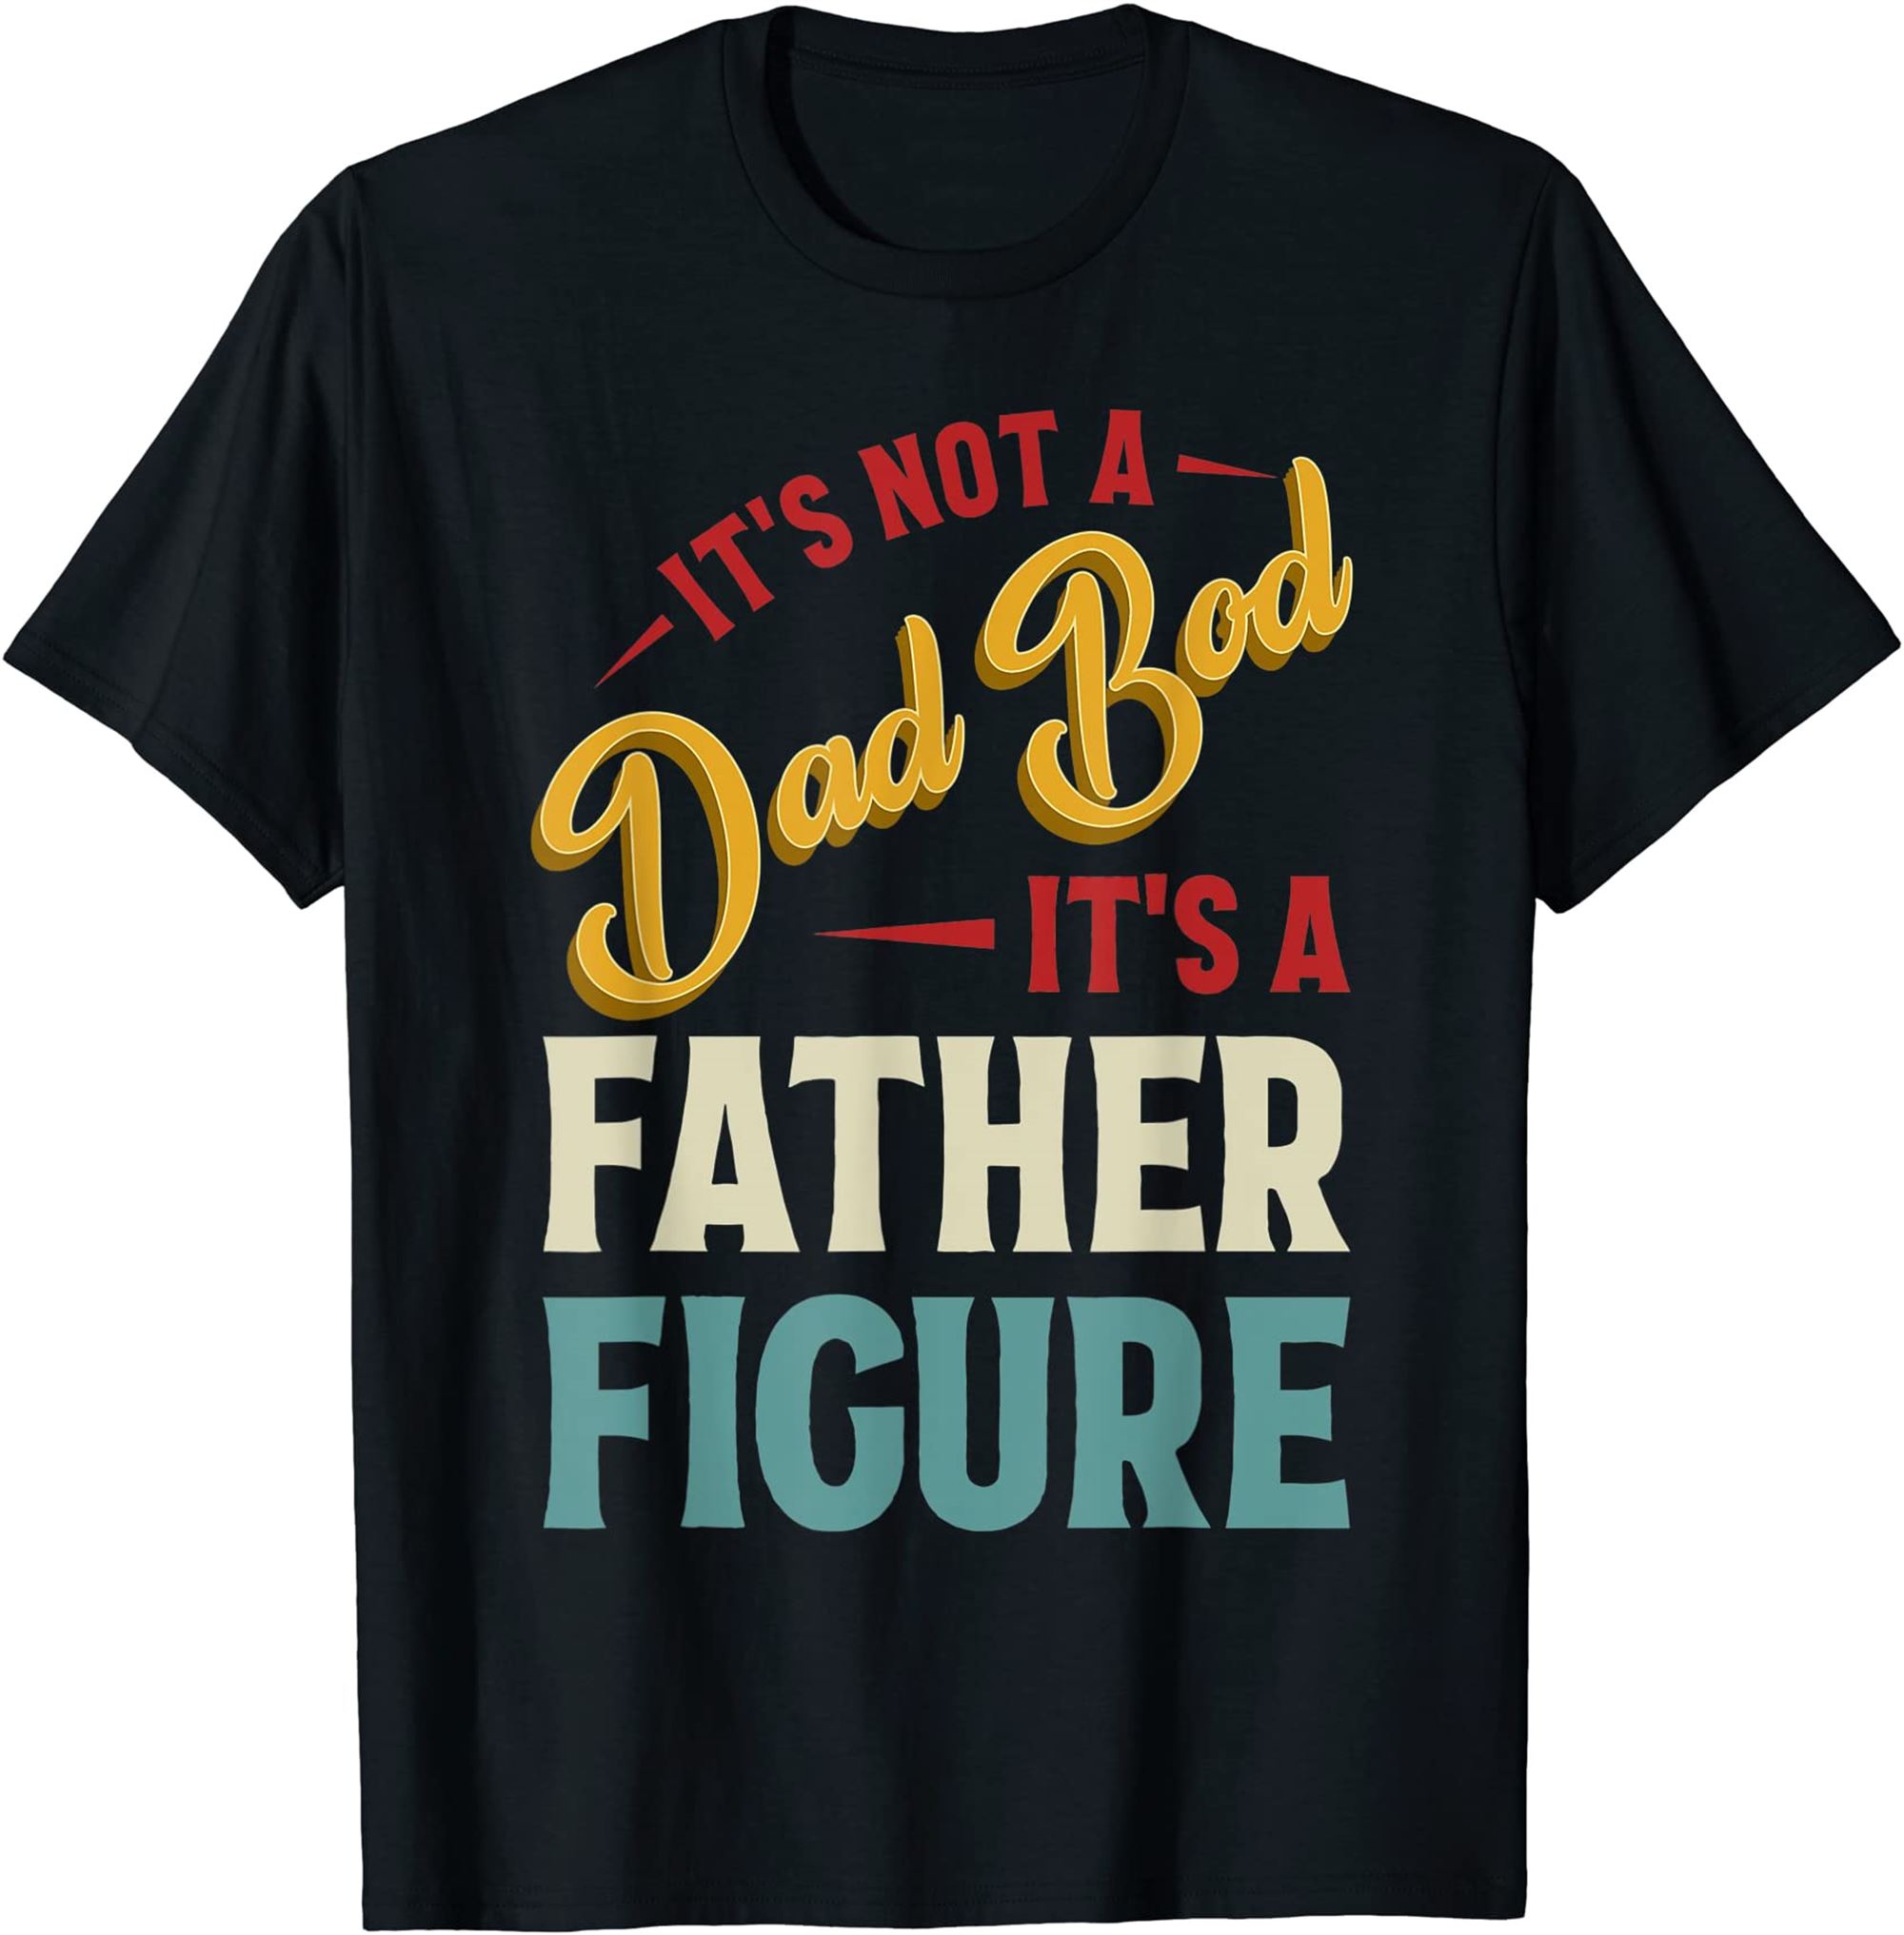 Vintage Its Not A Dad Bod Its Father Figure Design T-shirt Plus Size Up To 5xl